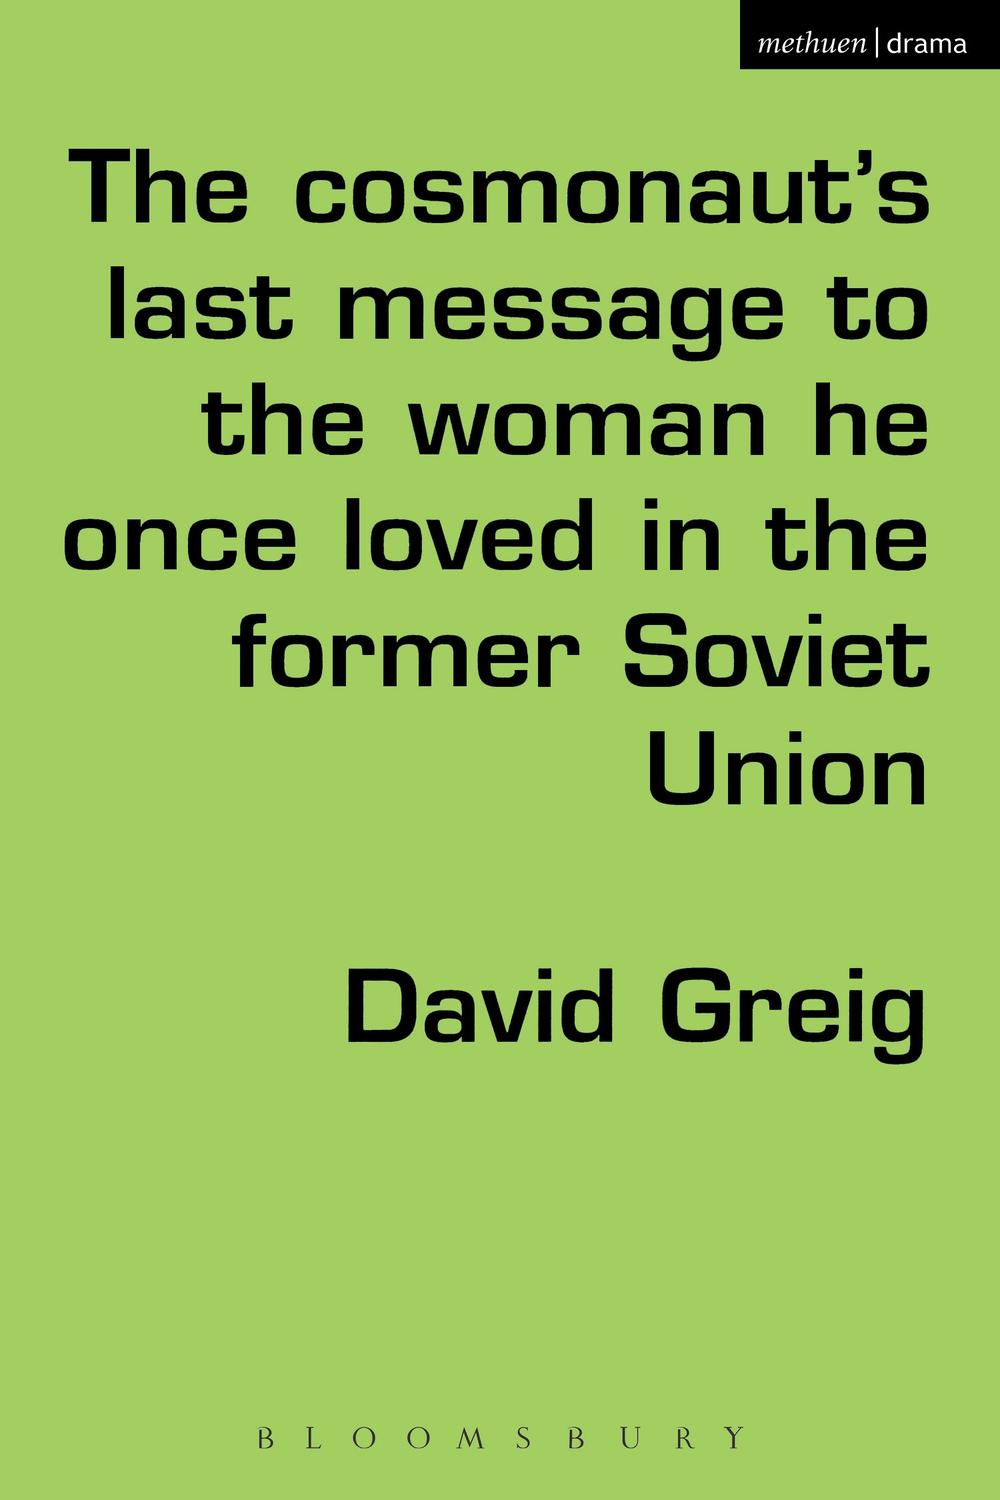 The Cosmonauts Last Message to the Woman He Once Loved in the Former Soviet Union - David Greig